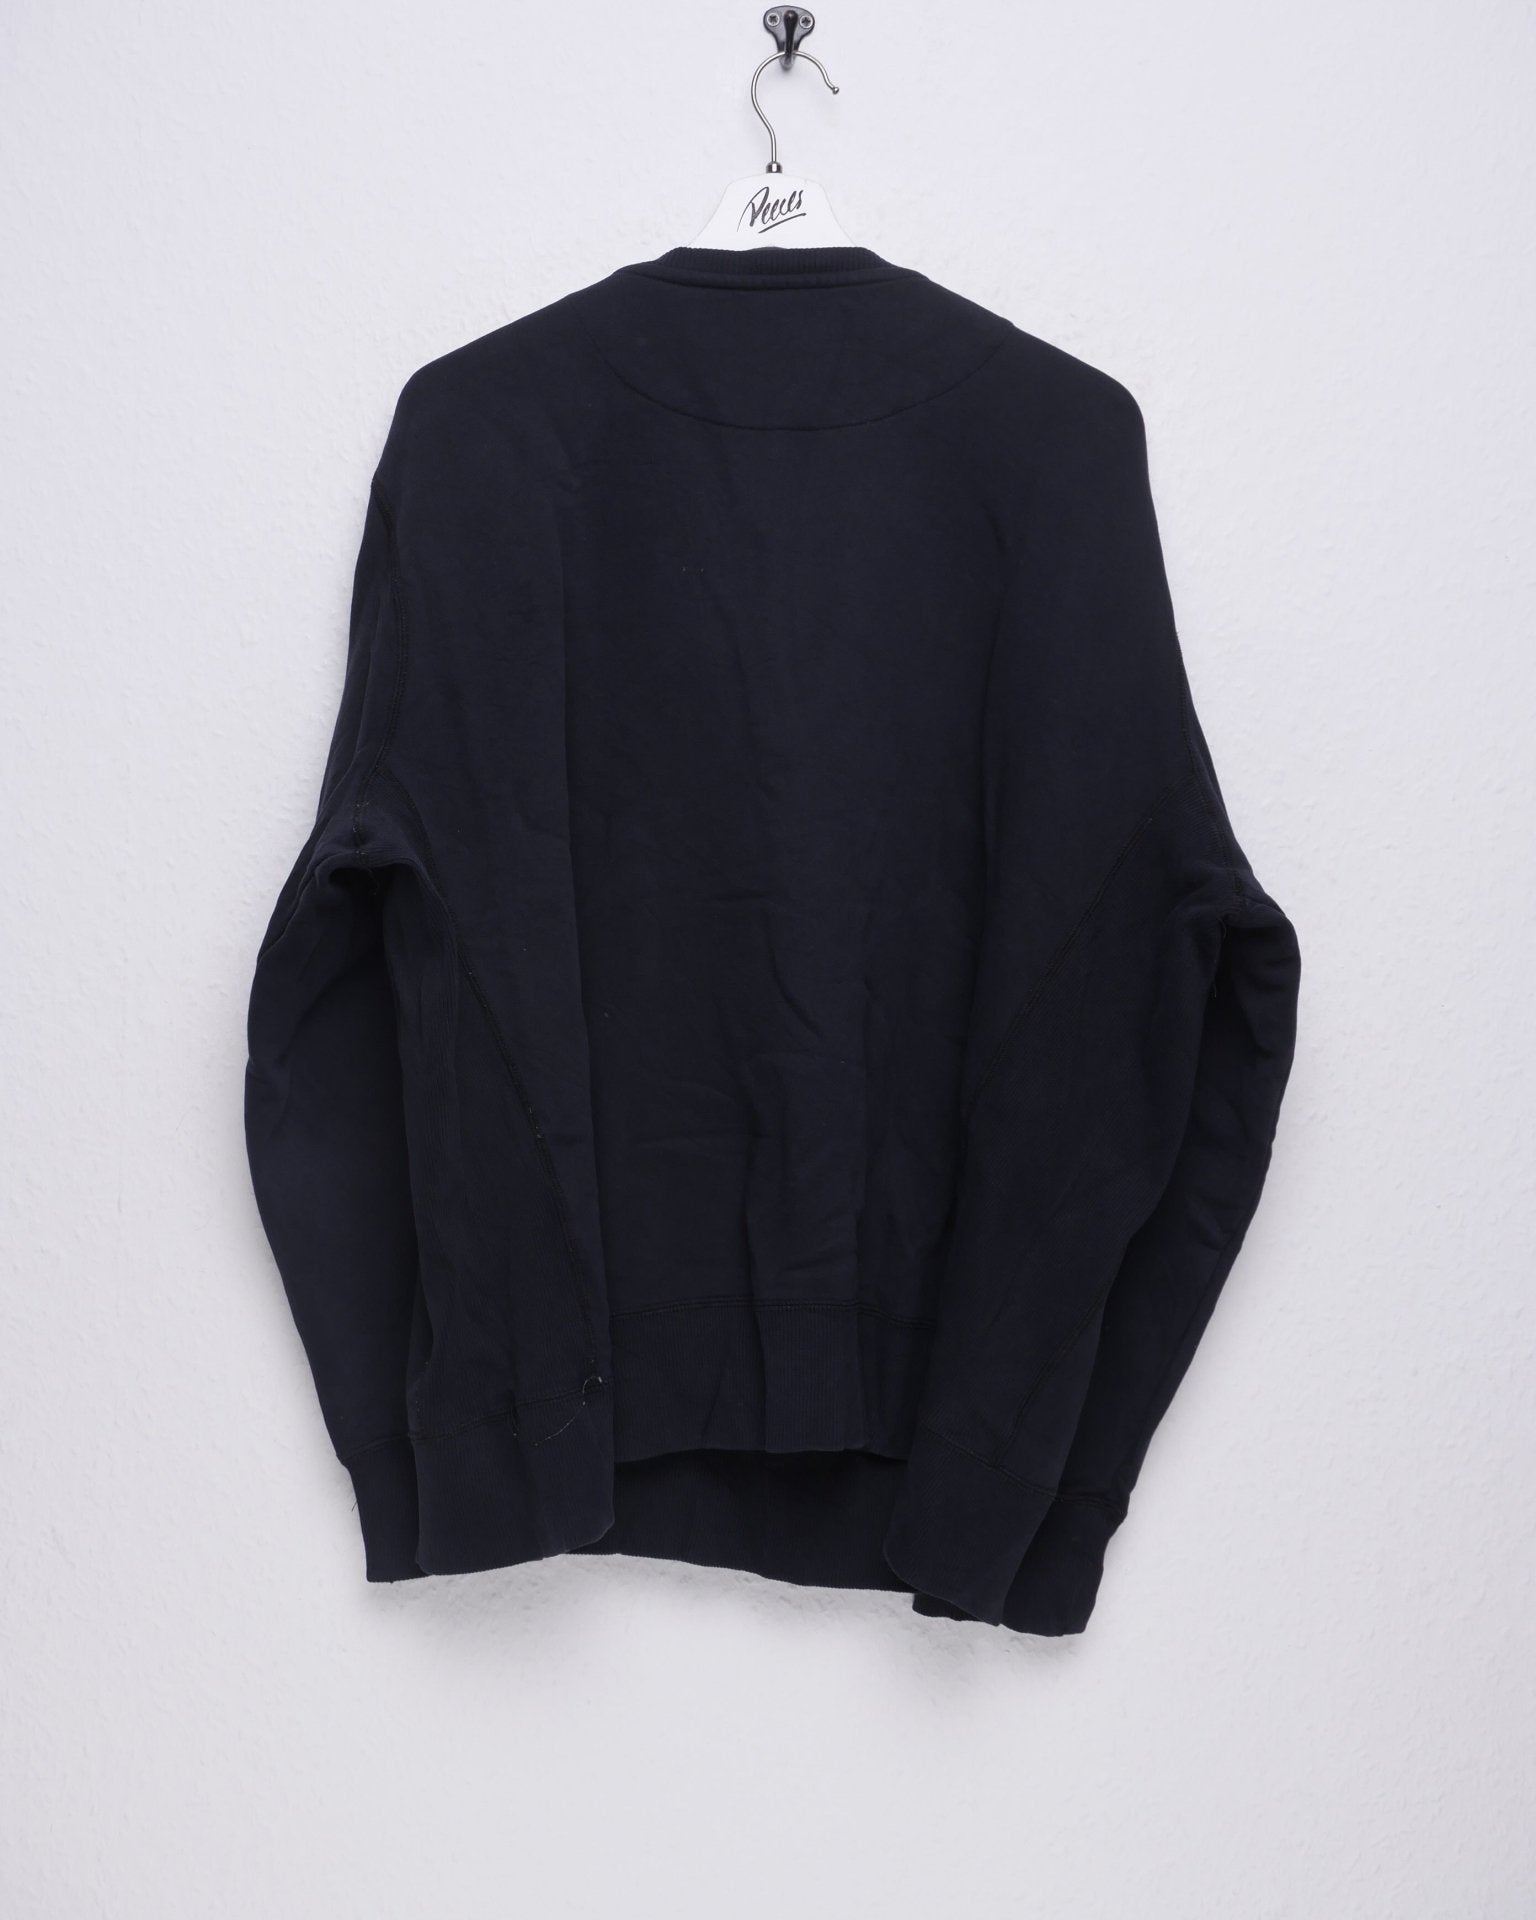 Nike embroidered Swoosh Sweater - Peeces